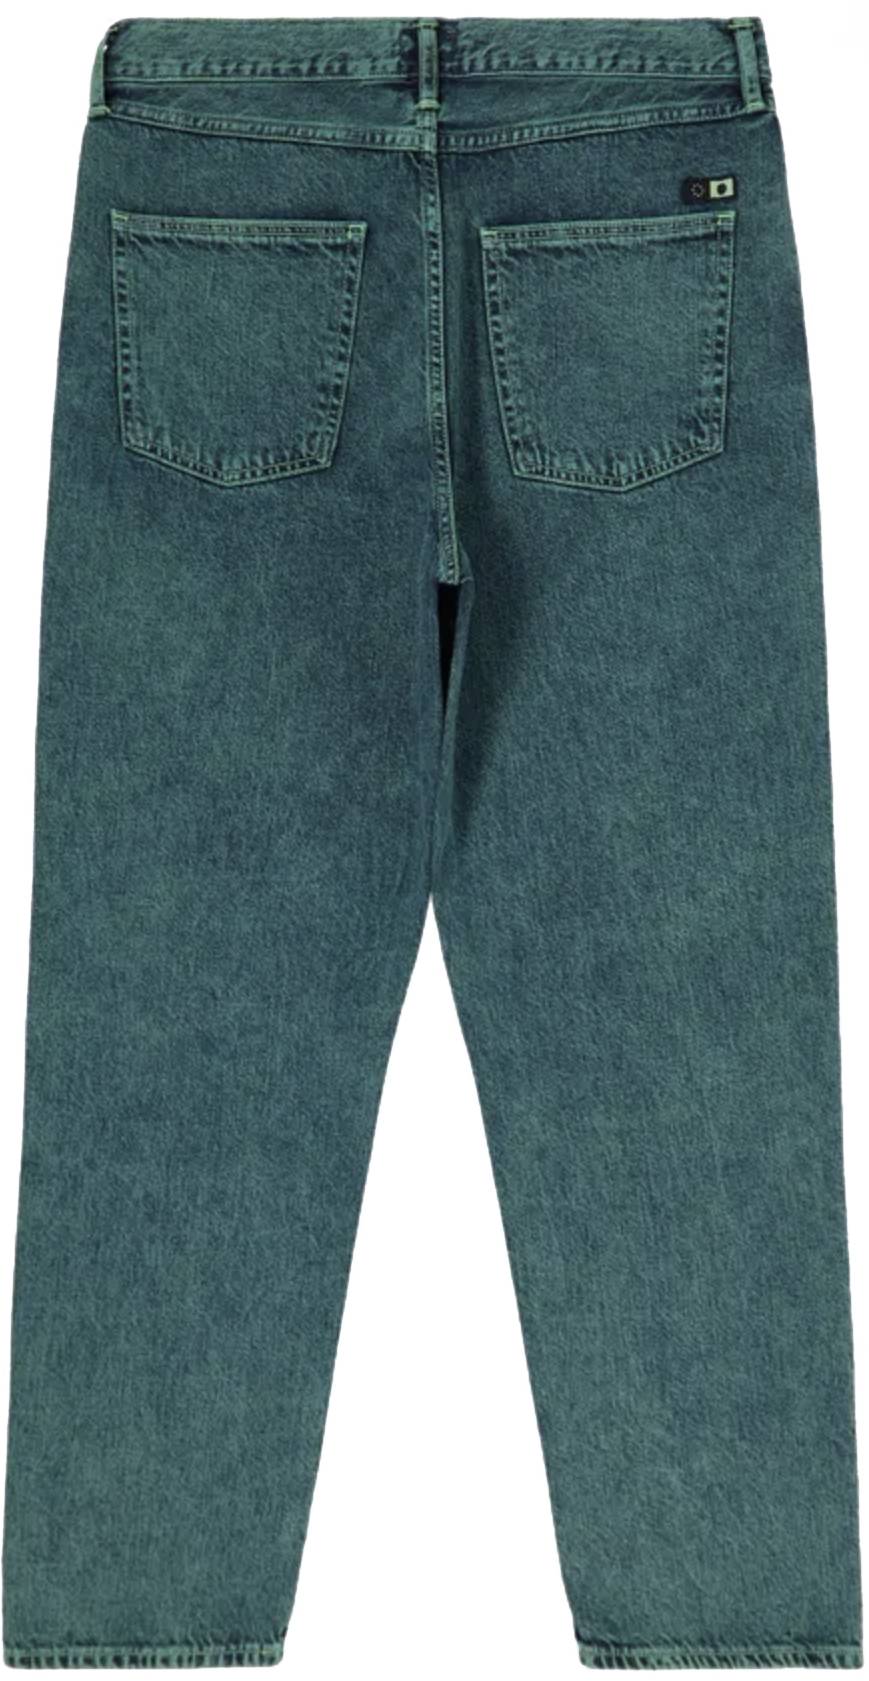  Edwin Jeans Cosmos Pant Reworked Fir Verde Uomo - 4